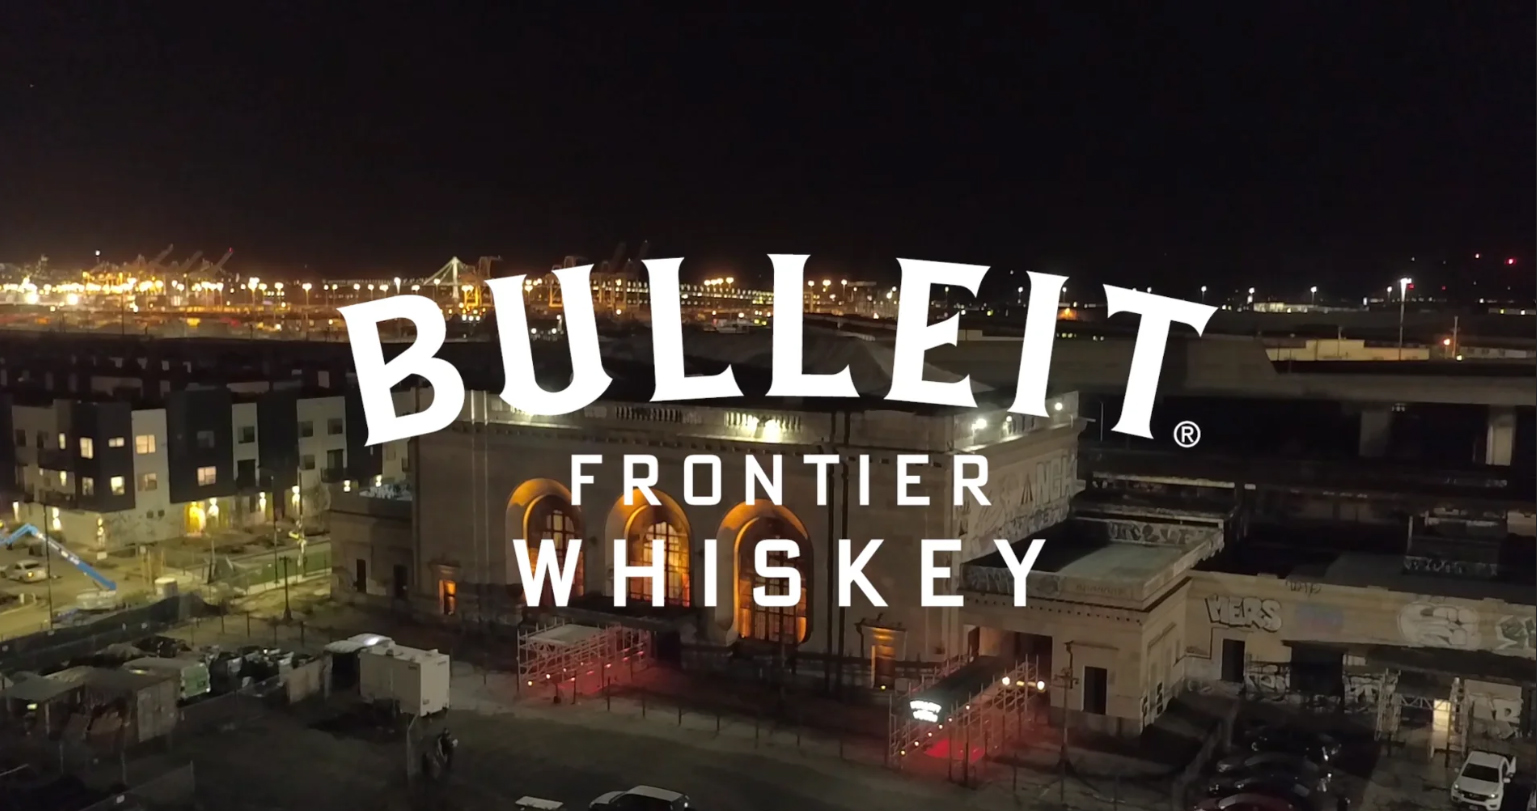 Bulleit Frontier Whiskey 3D Printed Frontier Event